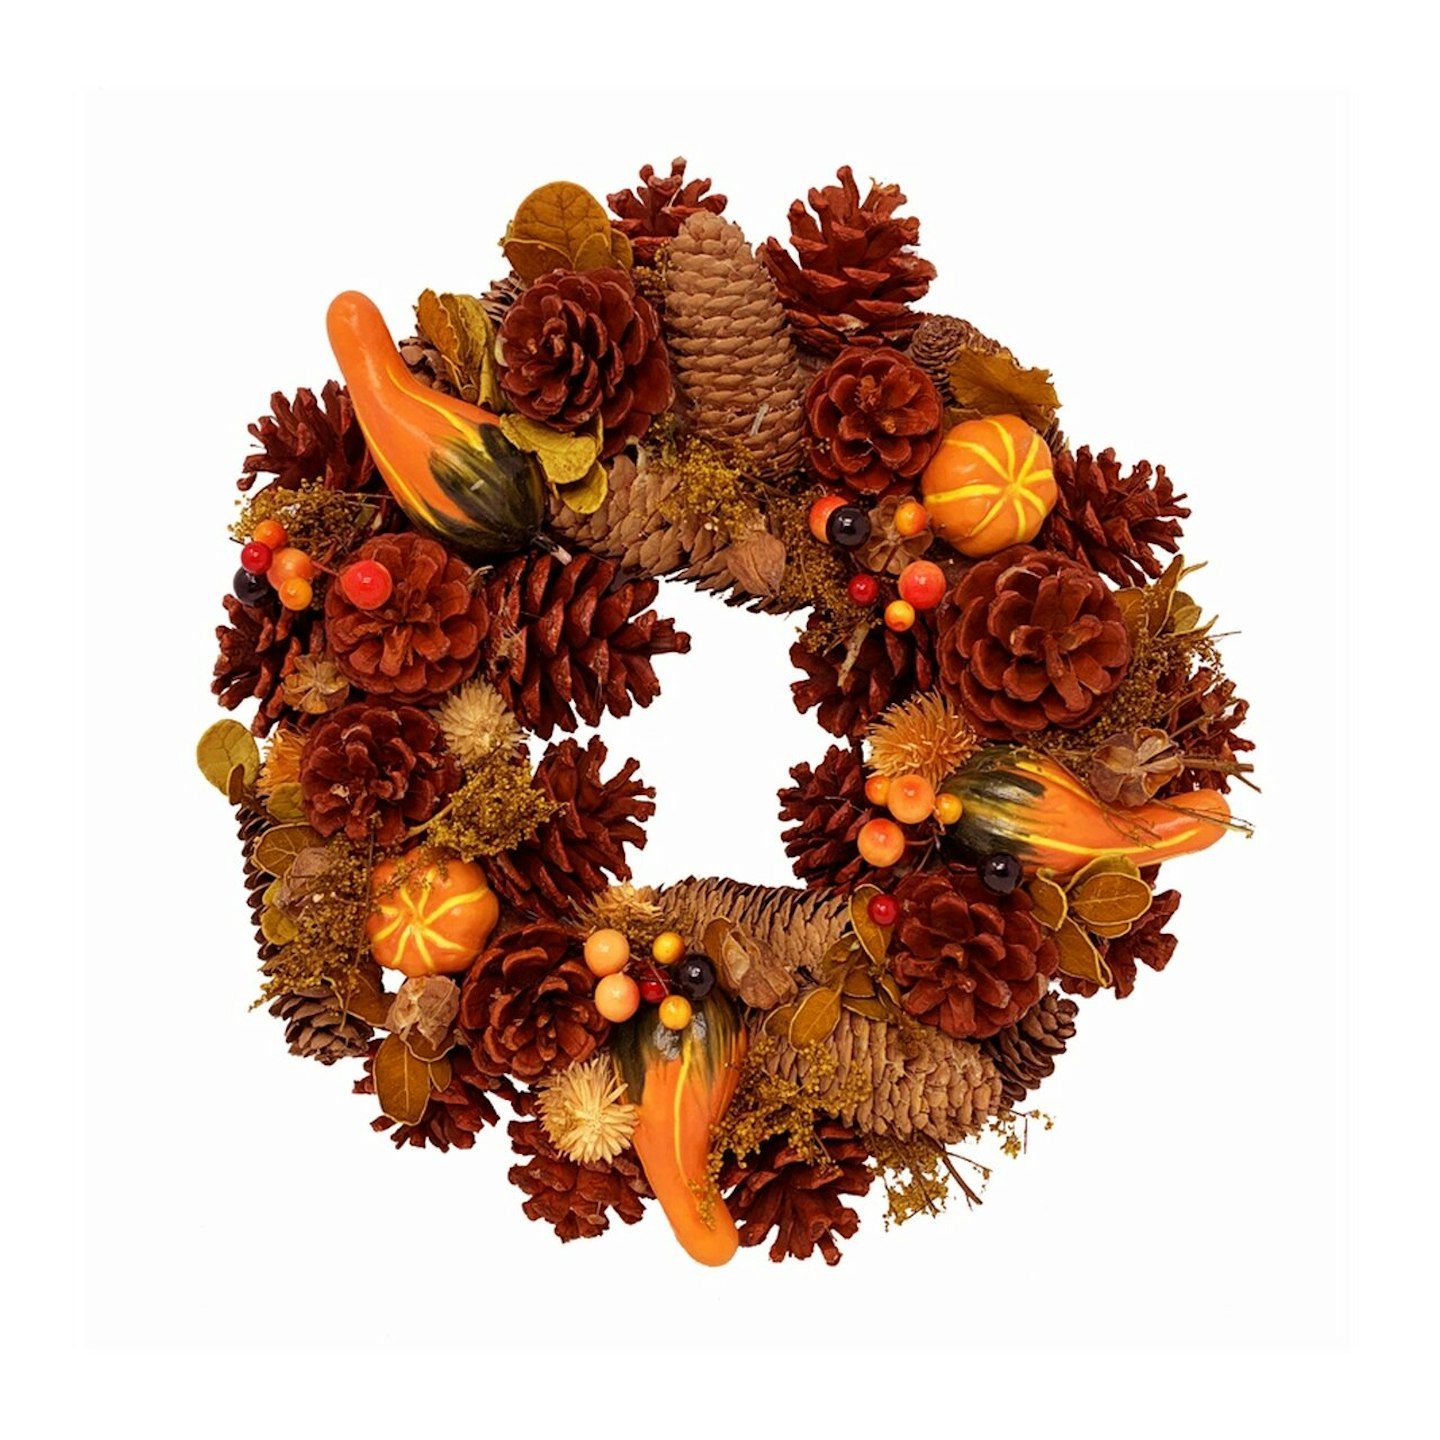 Autumn Wreath with Artificial Fruits Dried Flowers and ConesAutumn Wreath with Artificial Fruits Dried Flowers and Cones boxedAutumn Wreath with Artificial Fruits Dried Flowers and Cones back Autumn Wreath with Artificial Fruits Dried Flowers and Cones